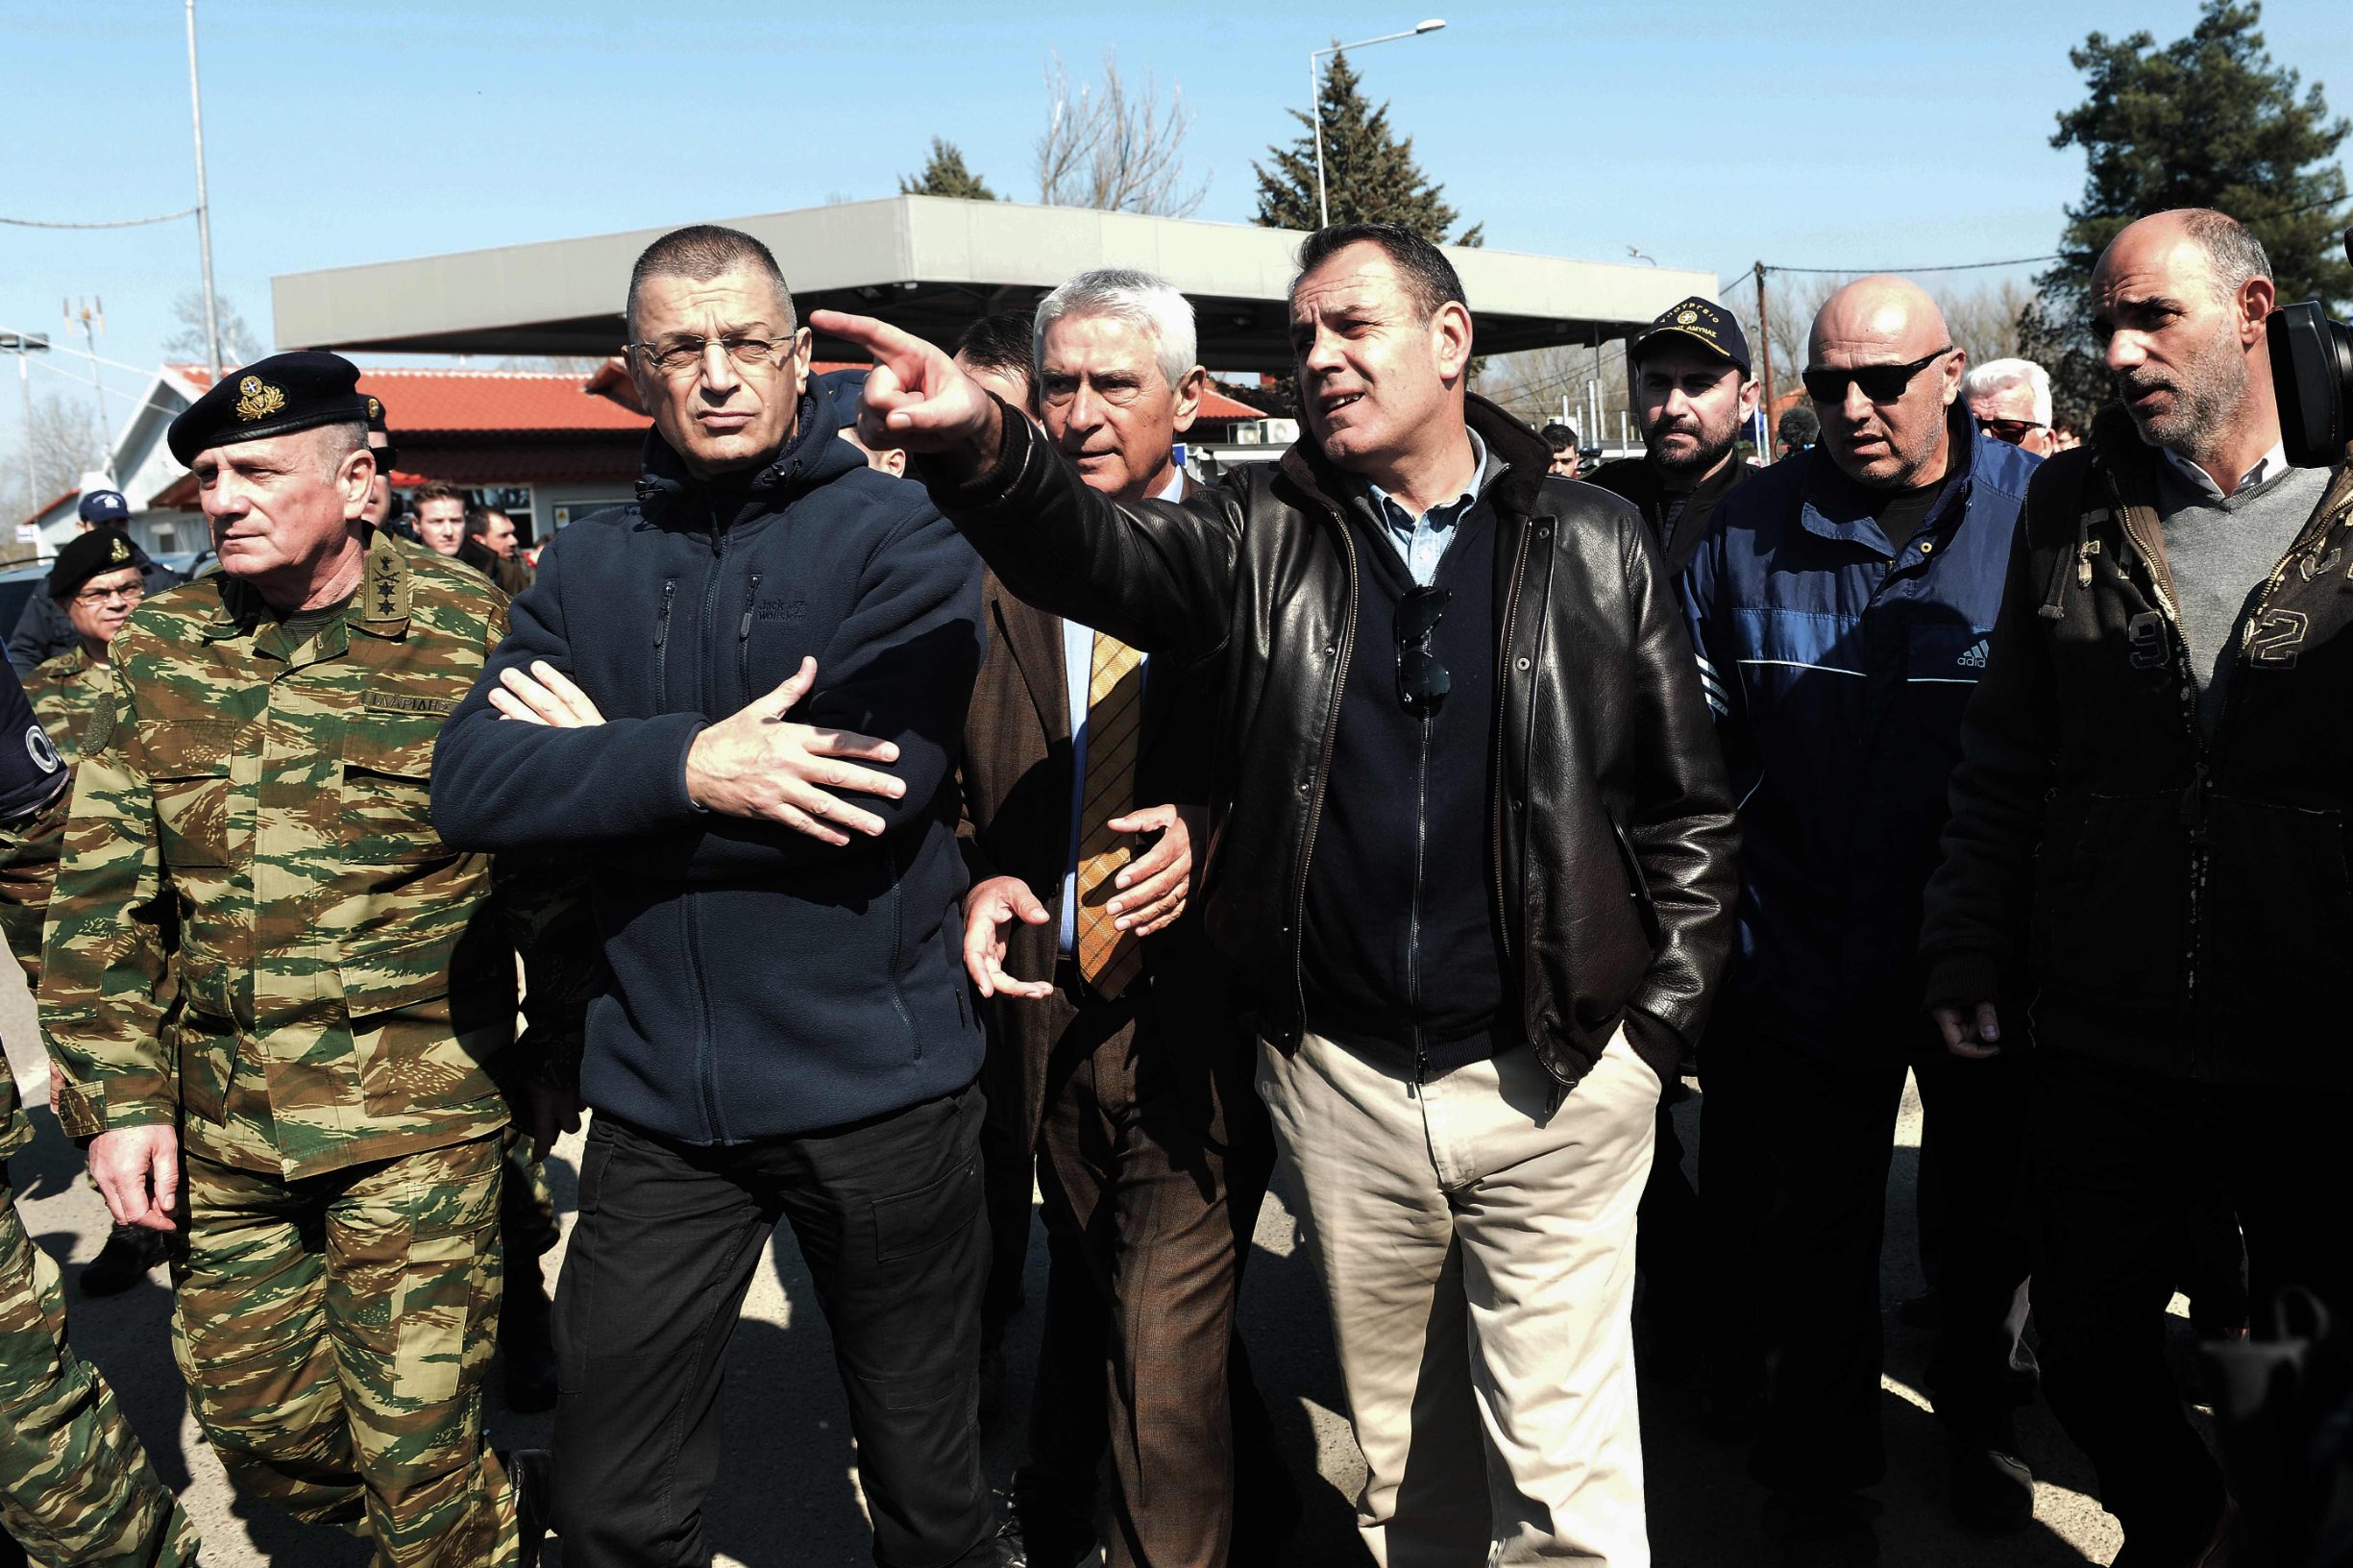 Greek Minister of defence Nikos Panagiotopoulos (C-R) walks in the village of Kastanies on March 1, 2020. - Thousands more migrants reached the Turkish border with Greece on March 1, 2020, AFP journalists said, after President threatened to let them cross into Europe. At least 2,000 people including women and children arrived on the morning from Istanbul and walked through a field towards the Pazarkule border gate, a correspondent said. The group included Afghans, Syrians and Iraqis. (Photo by Sakis MITROLIDIS / AFP)